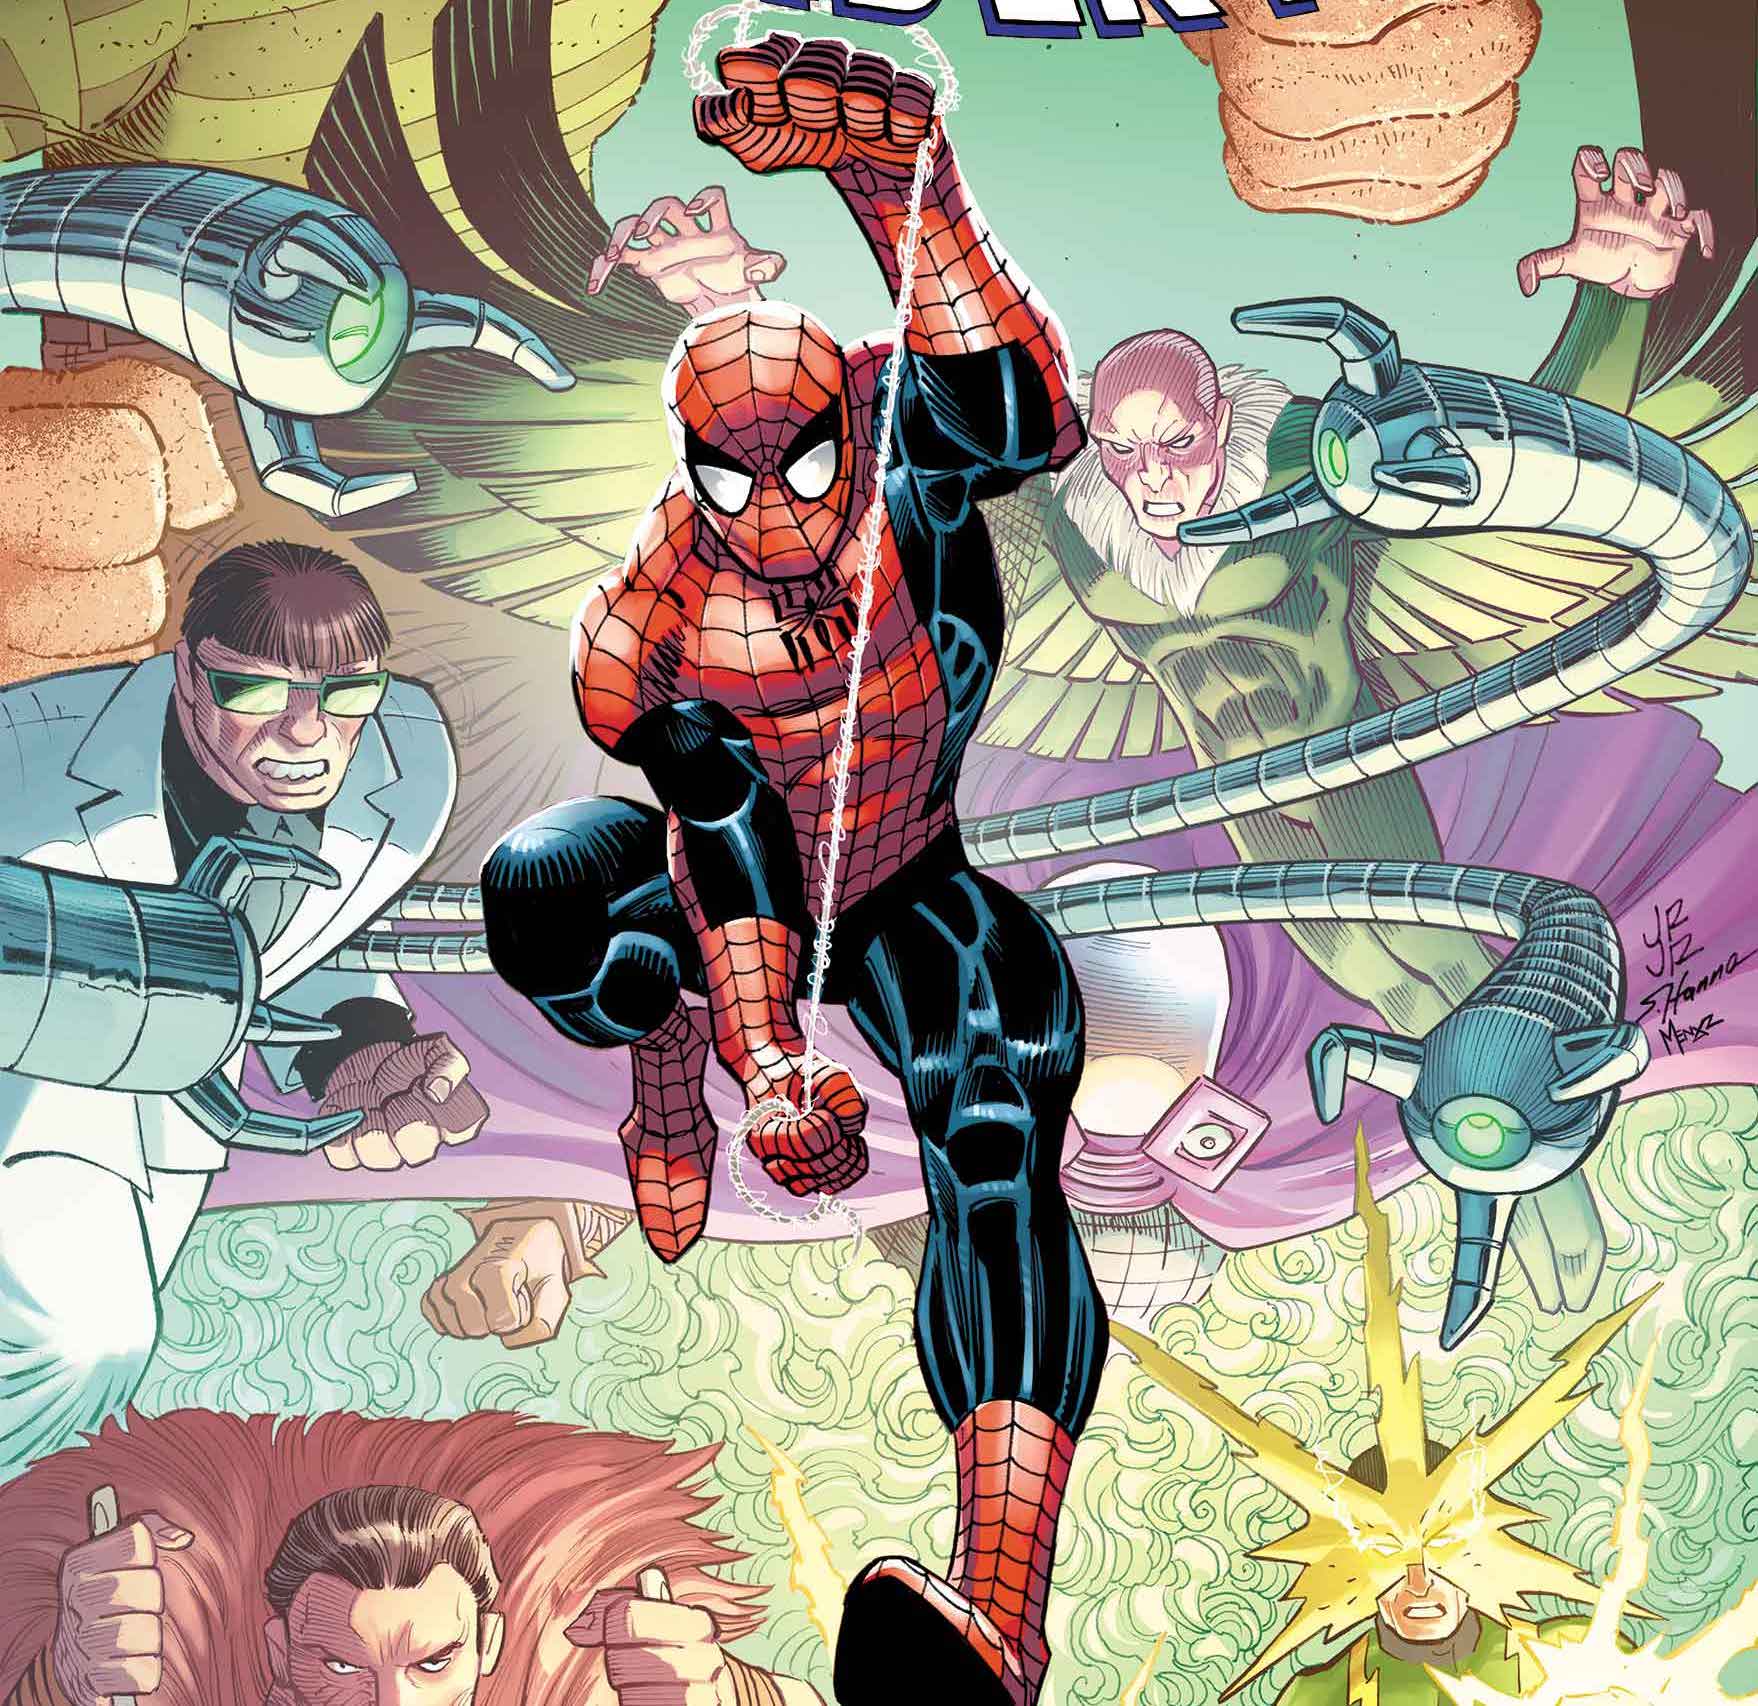 'Amazing Spider-Man' #6 (LGY #900) will wow you with its visuals